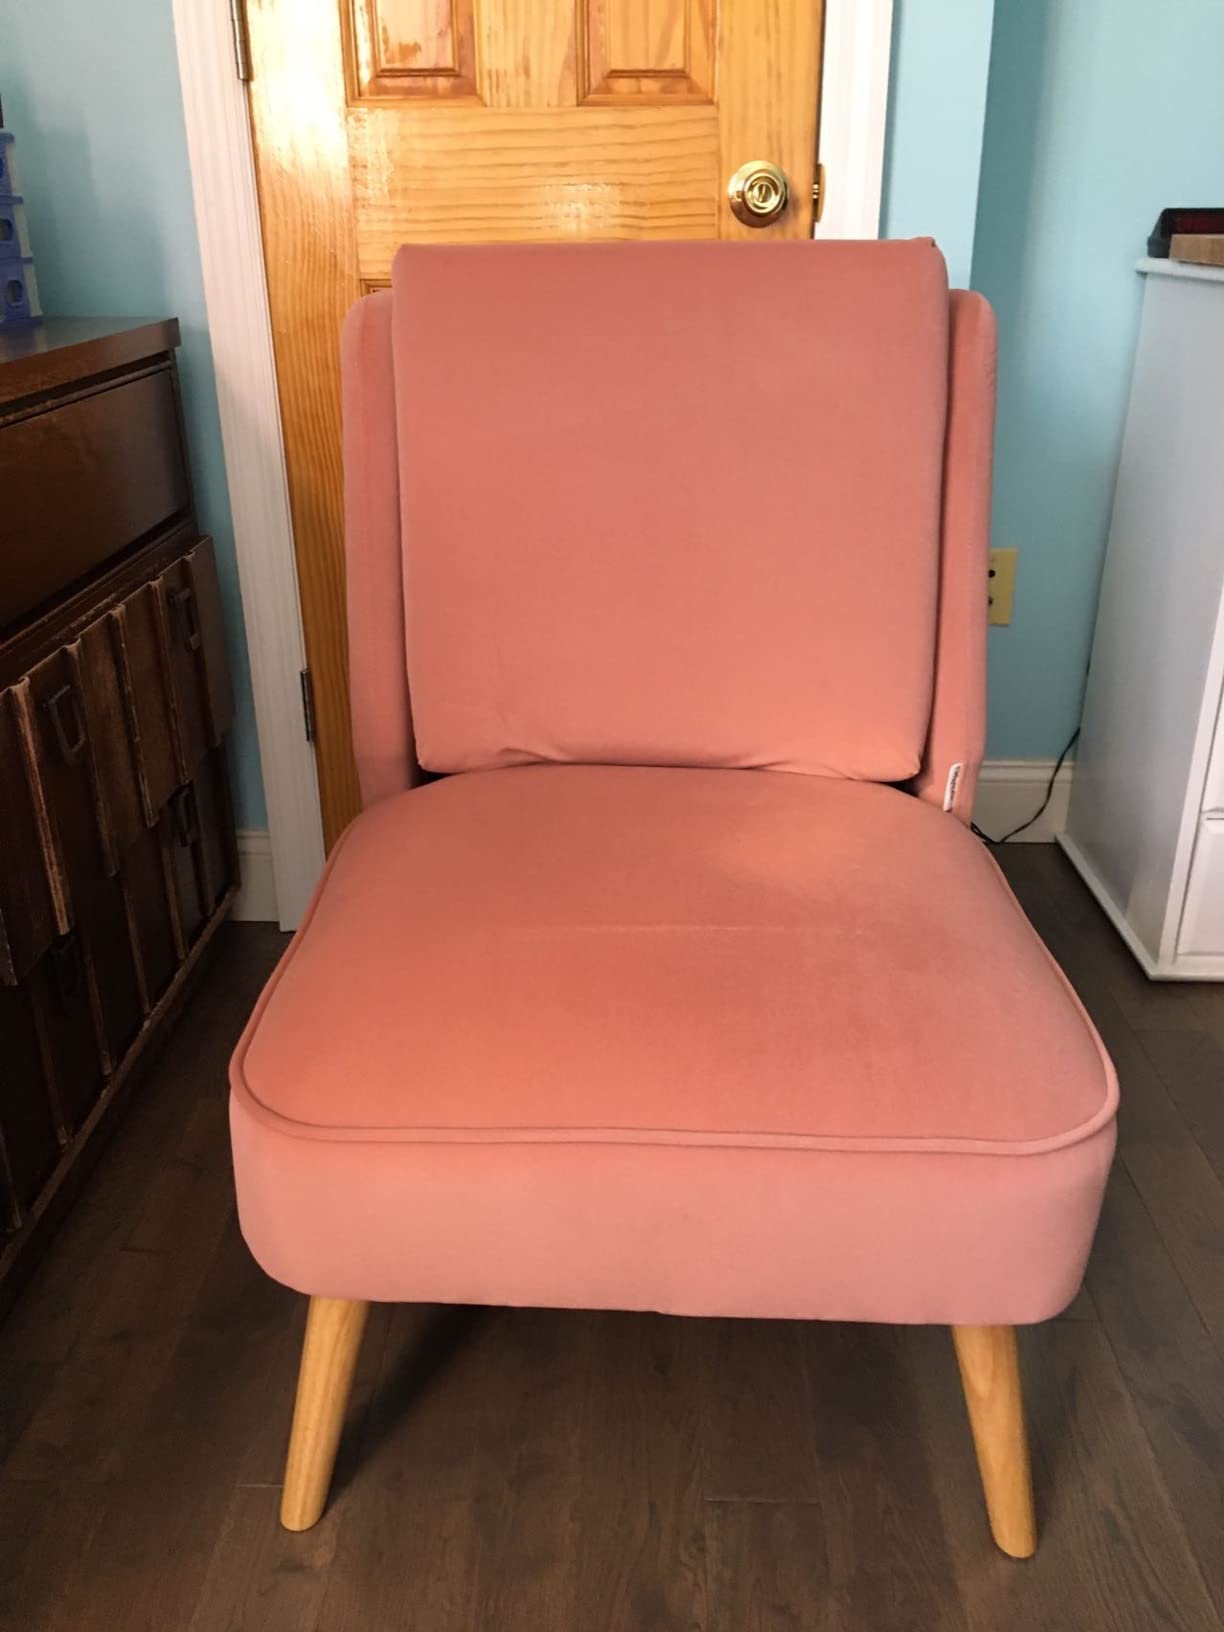 Adorable pink chair